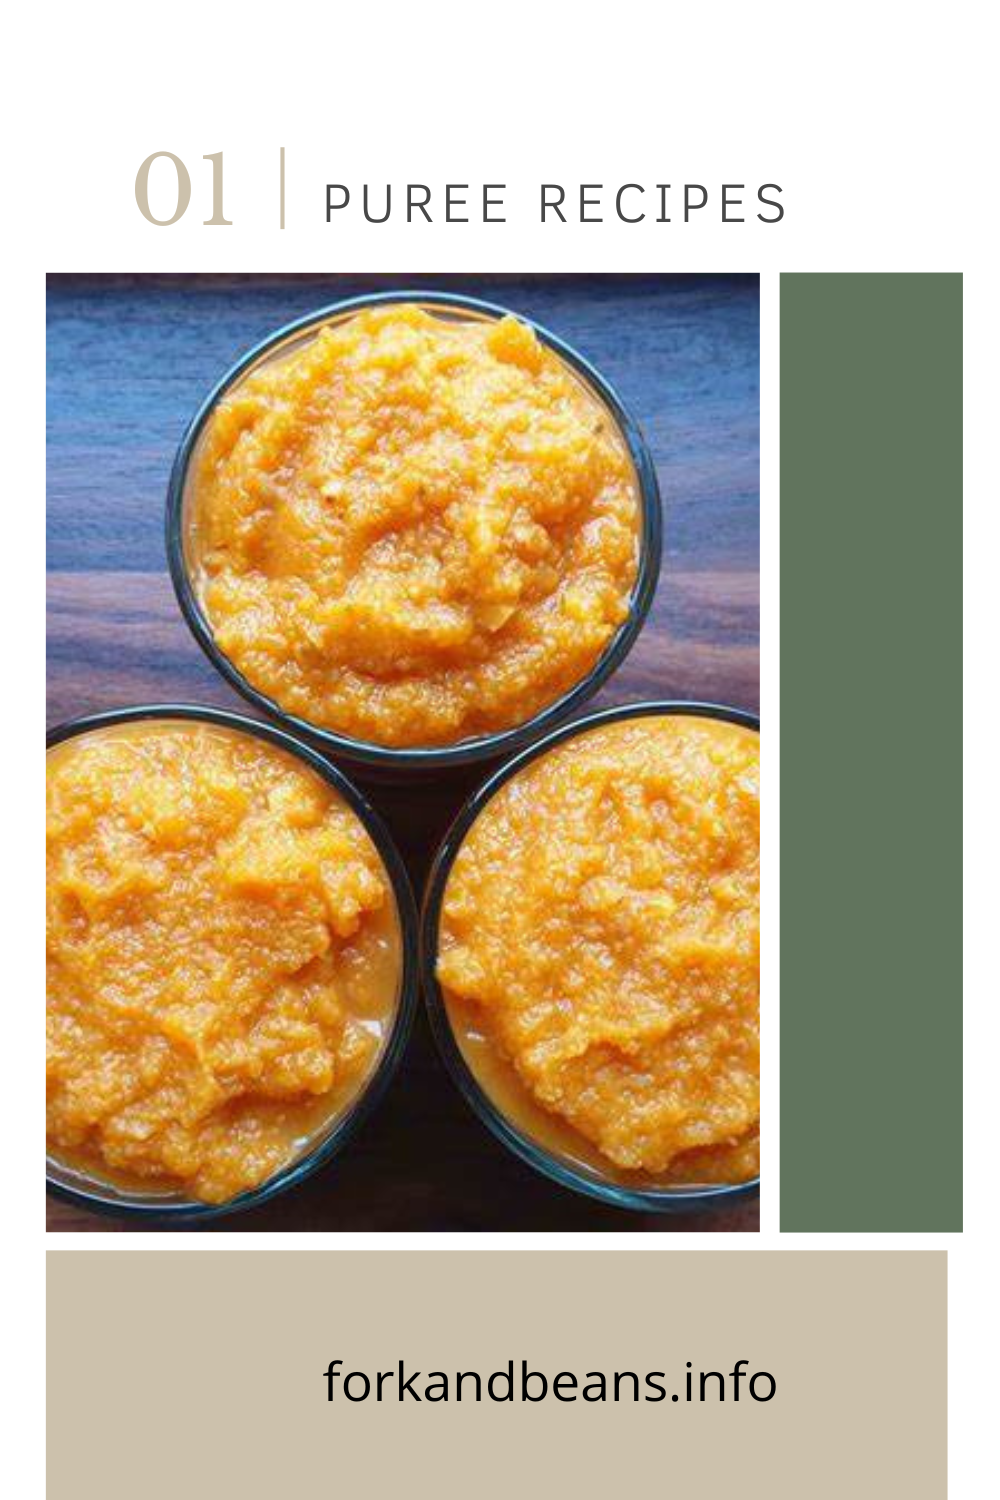 Recipe for pumpkin puree: Making your own canned pumpkin